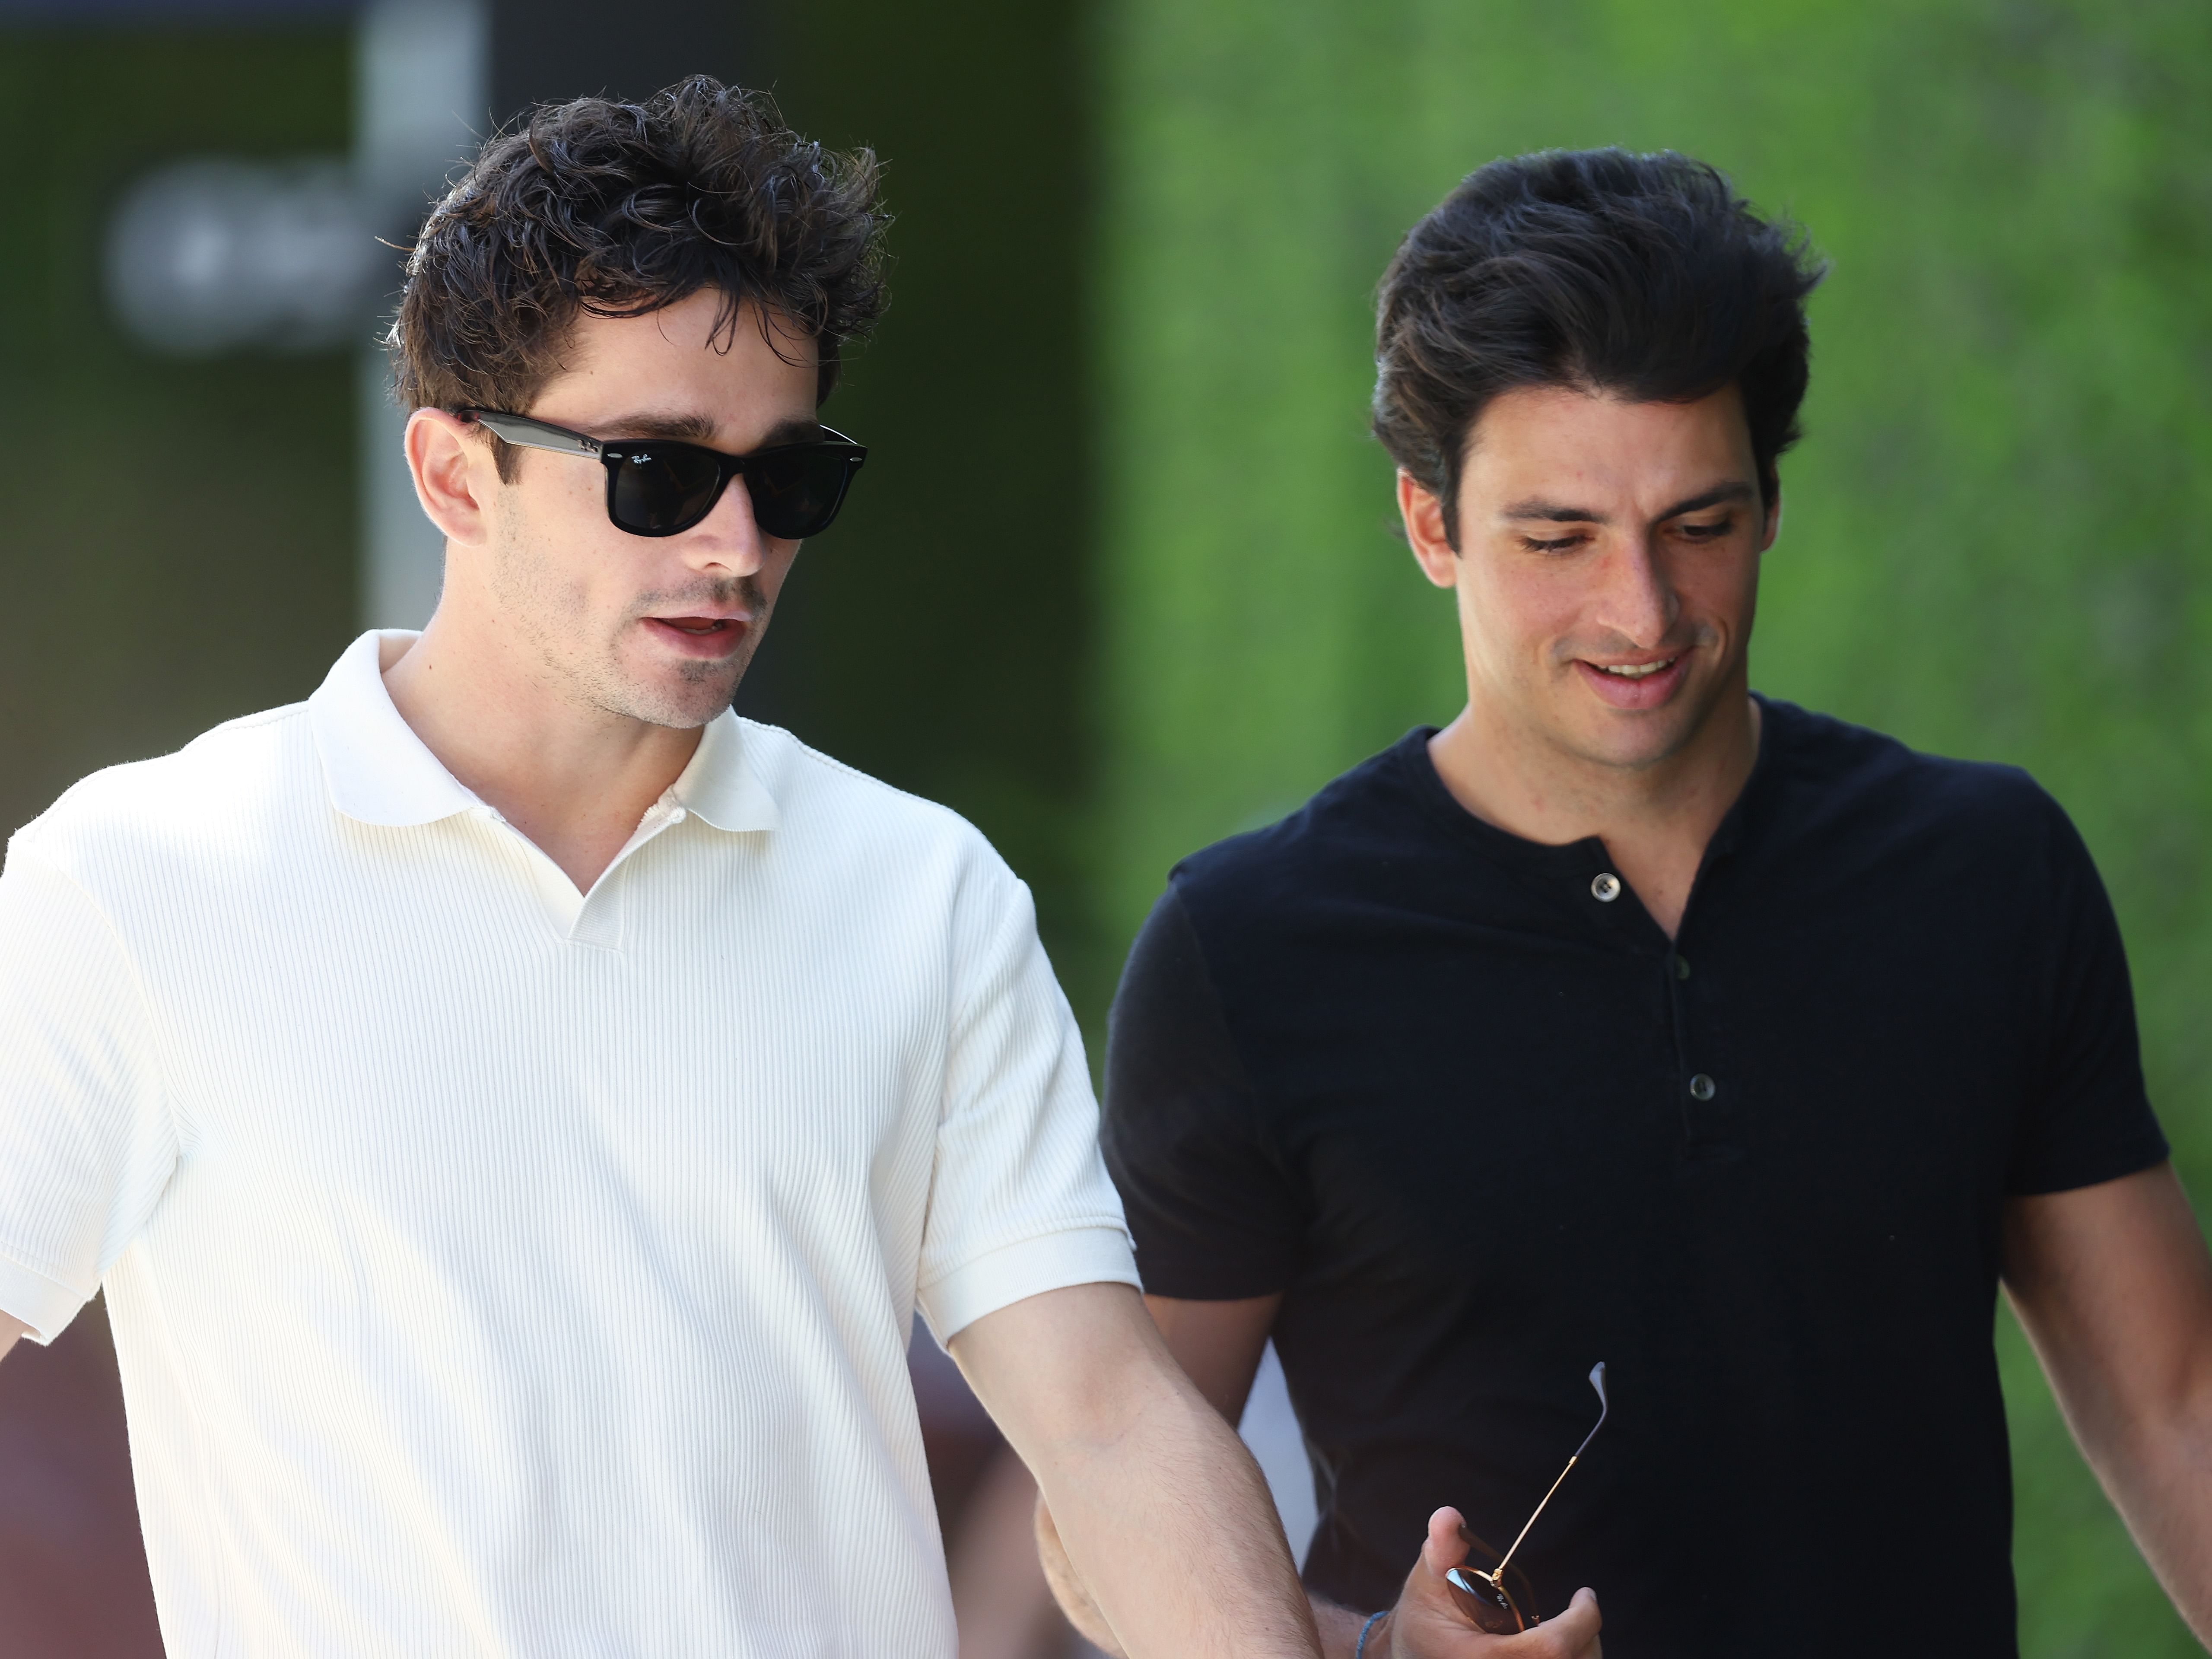 Charles Leclerc and Carlos Sainz walk in the paddock during previews ahead of the 2023 F1 Saudi Arabian Grand Prix (Photo by Lars Baron/Getty Images)